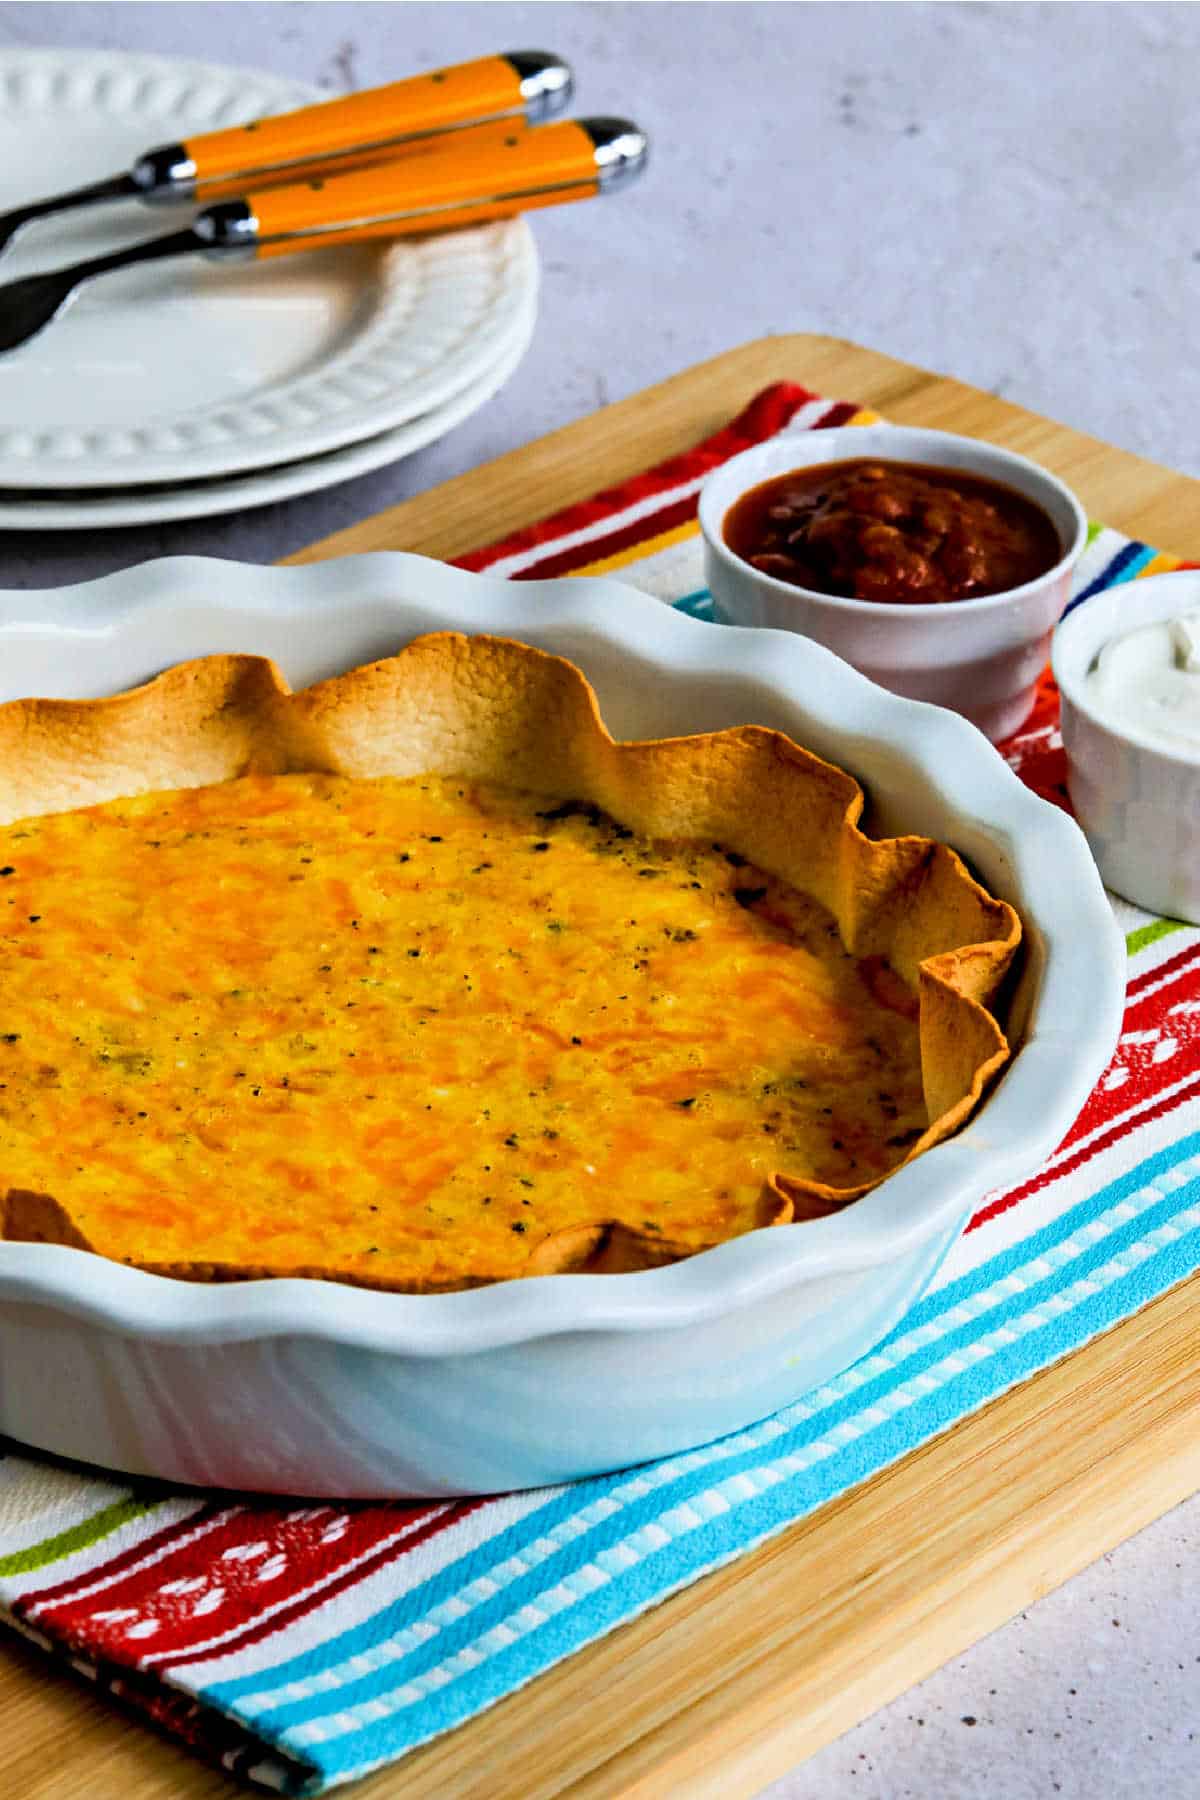 Tortilla Egg Bake with Cheese shown in pie dish with salsa and sour cream on the side.